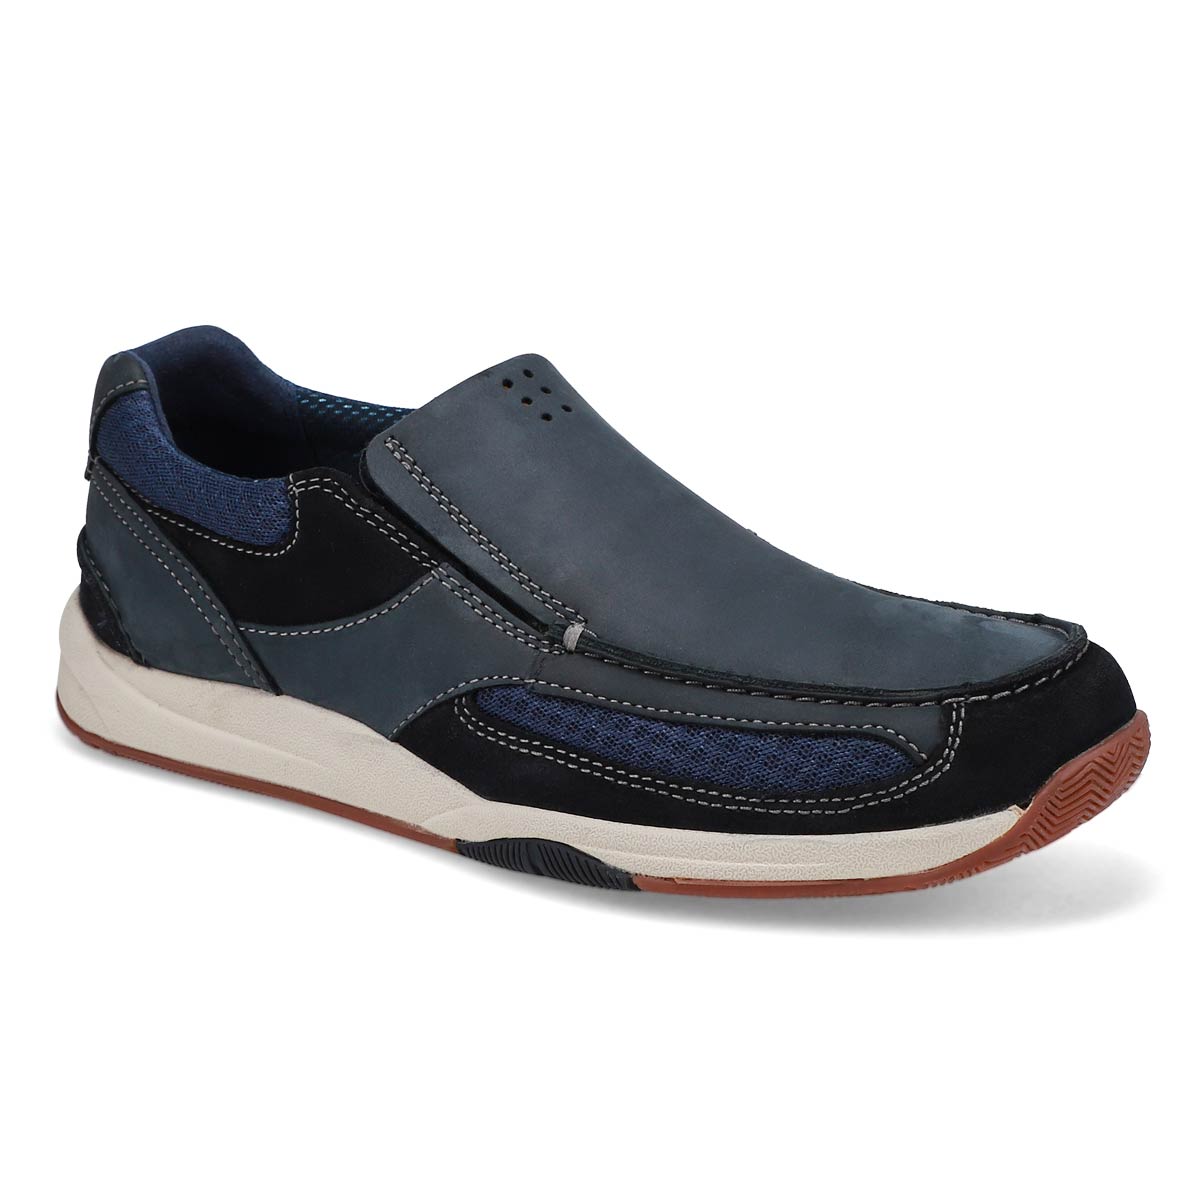 Clarks Men's LANGTON EASY navy casual loafers | SoftMoc.com